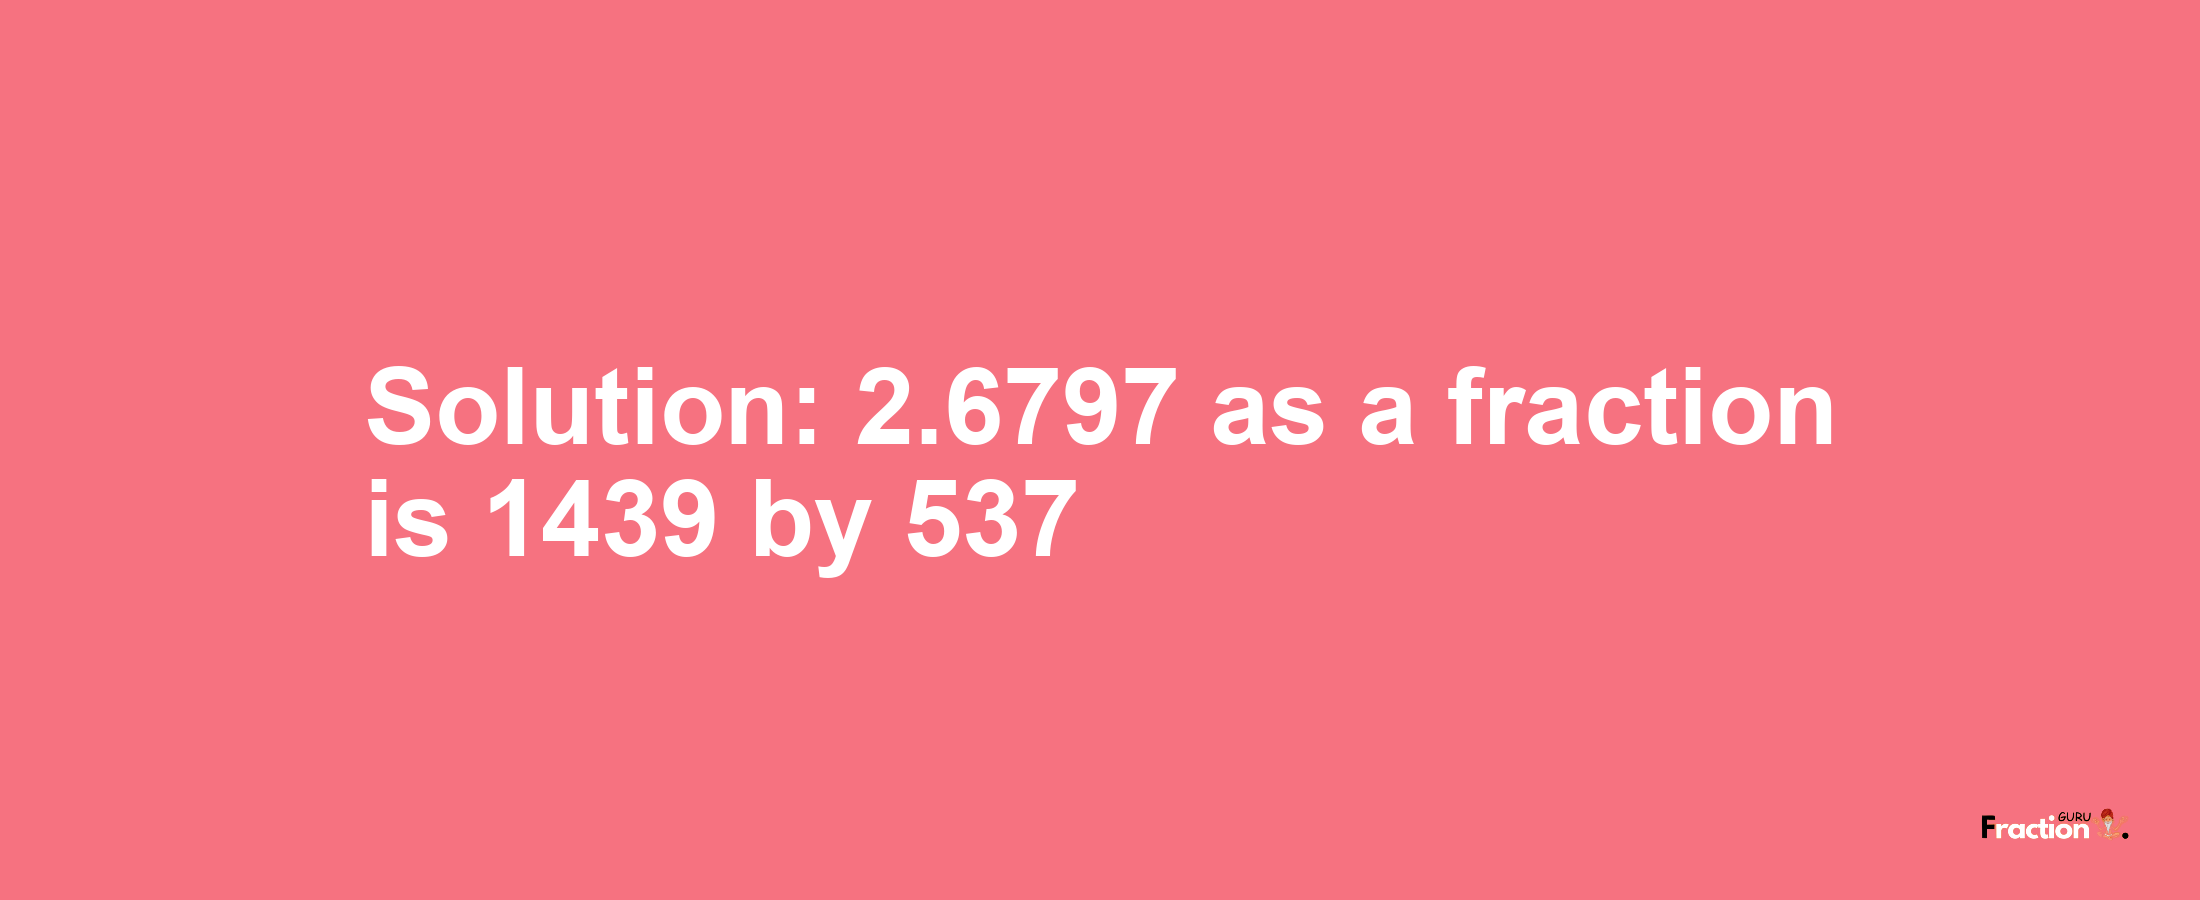 Solution:2.6797 as a fraction is 1439/537